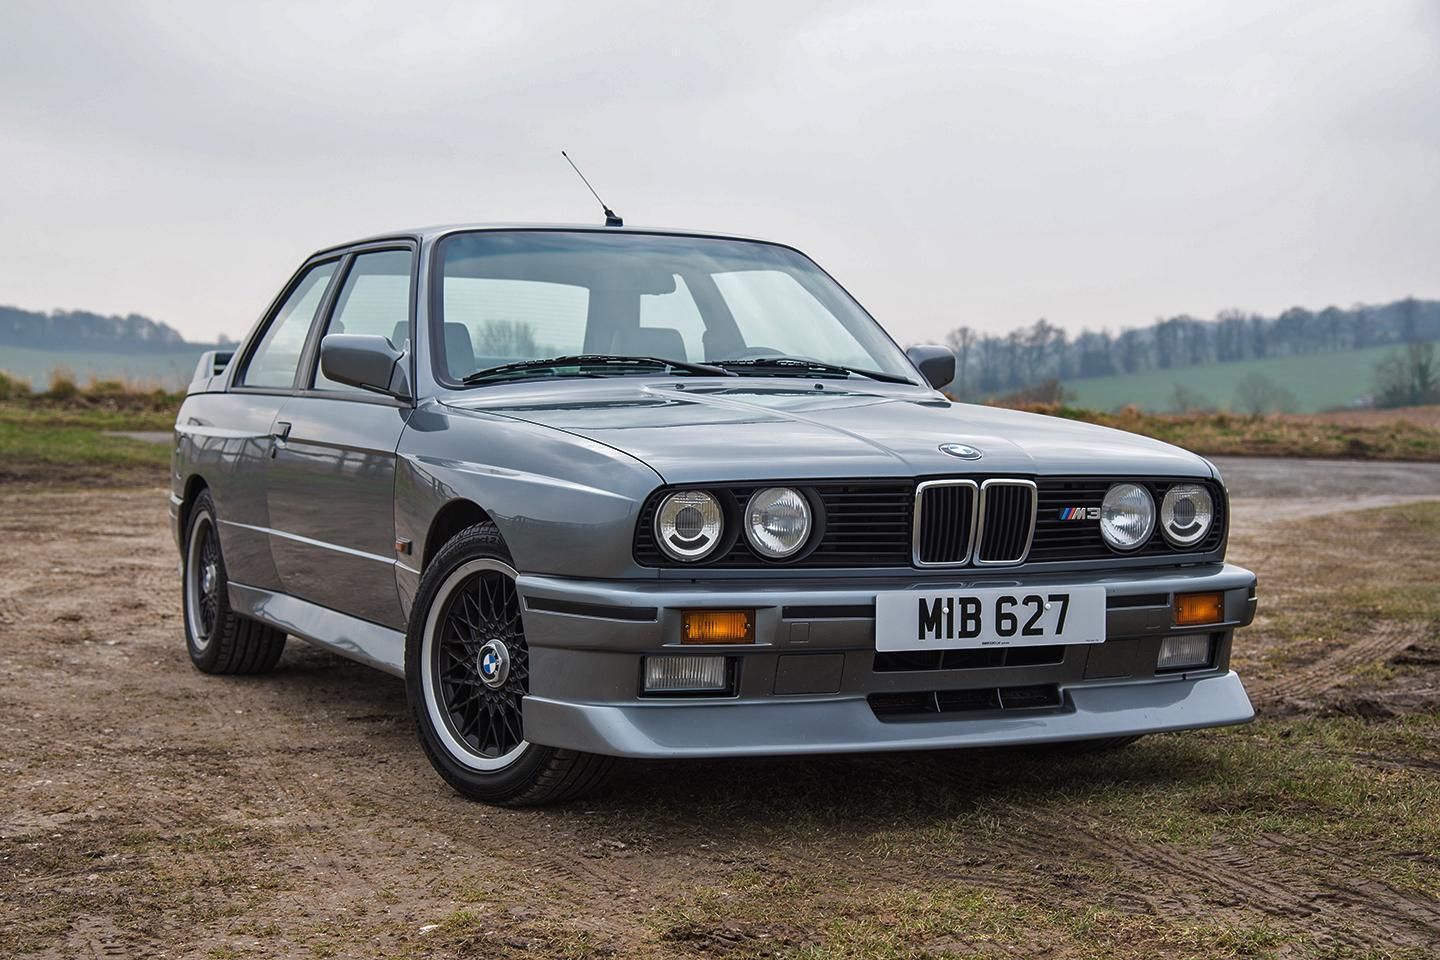 This Brand New BMW E30 3Series Might Not Be The Awesome Buy It Appears  To Be